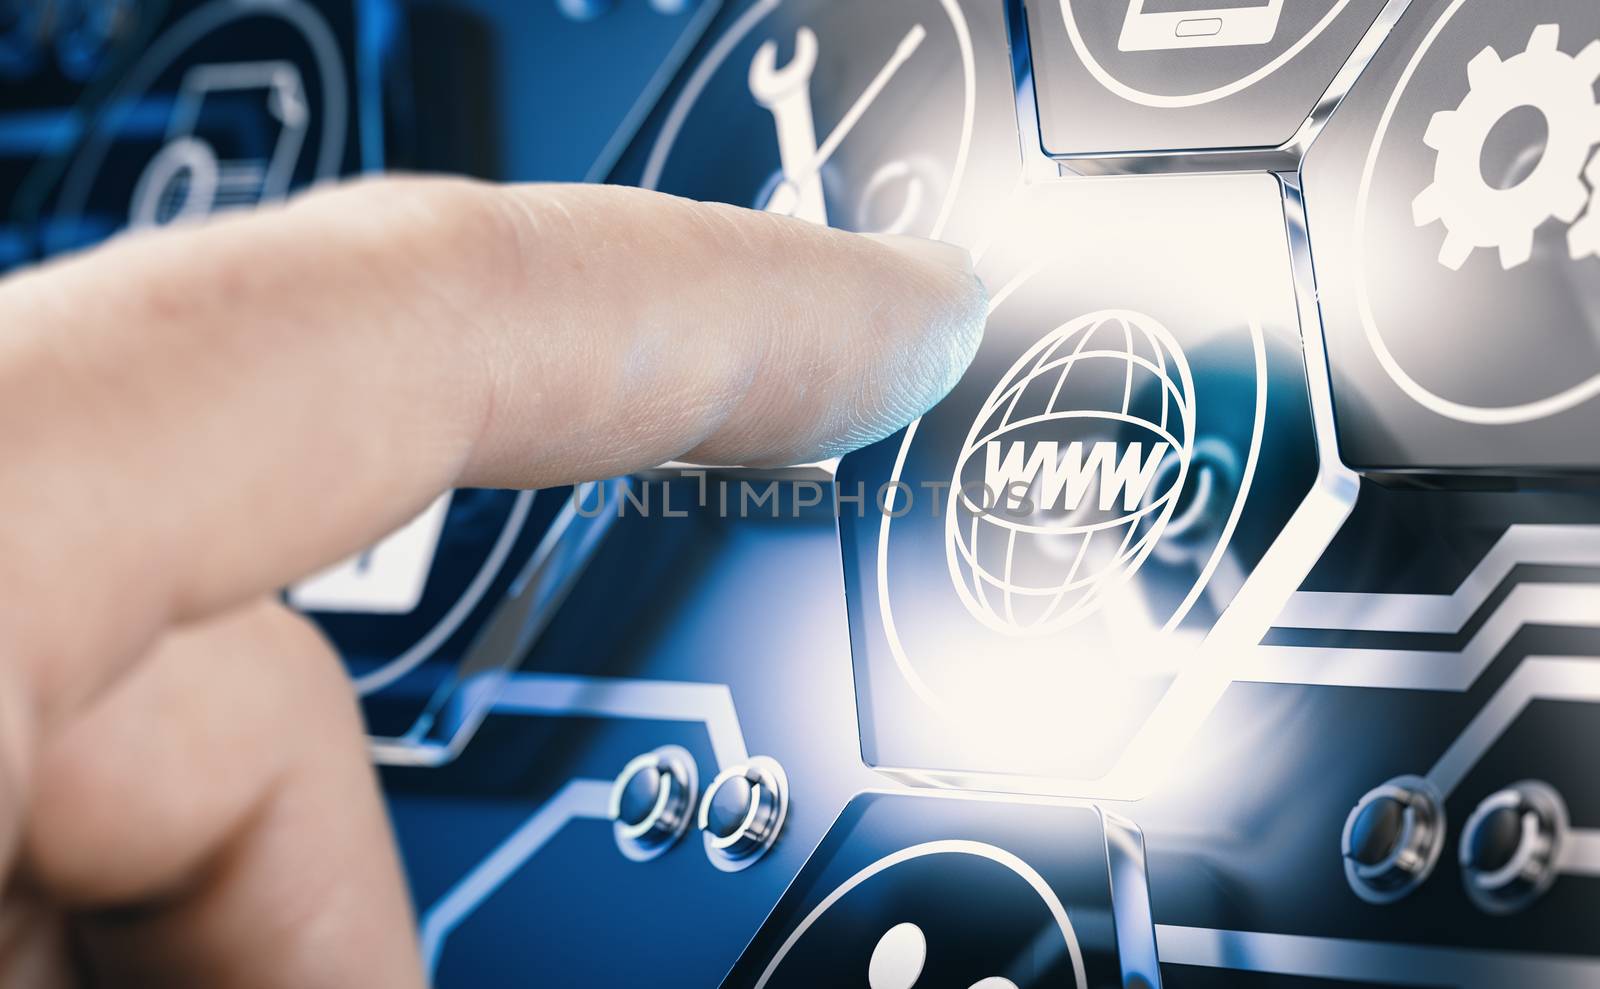 Hand pressing a digital button with www pictogram over blue background. Futuristic web technology concept. Composite image between a hand photography and a 3D background.